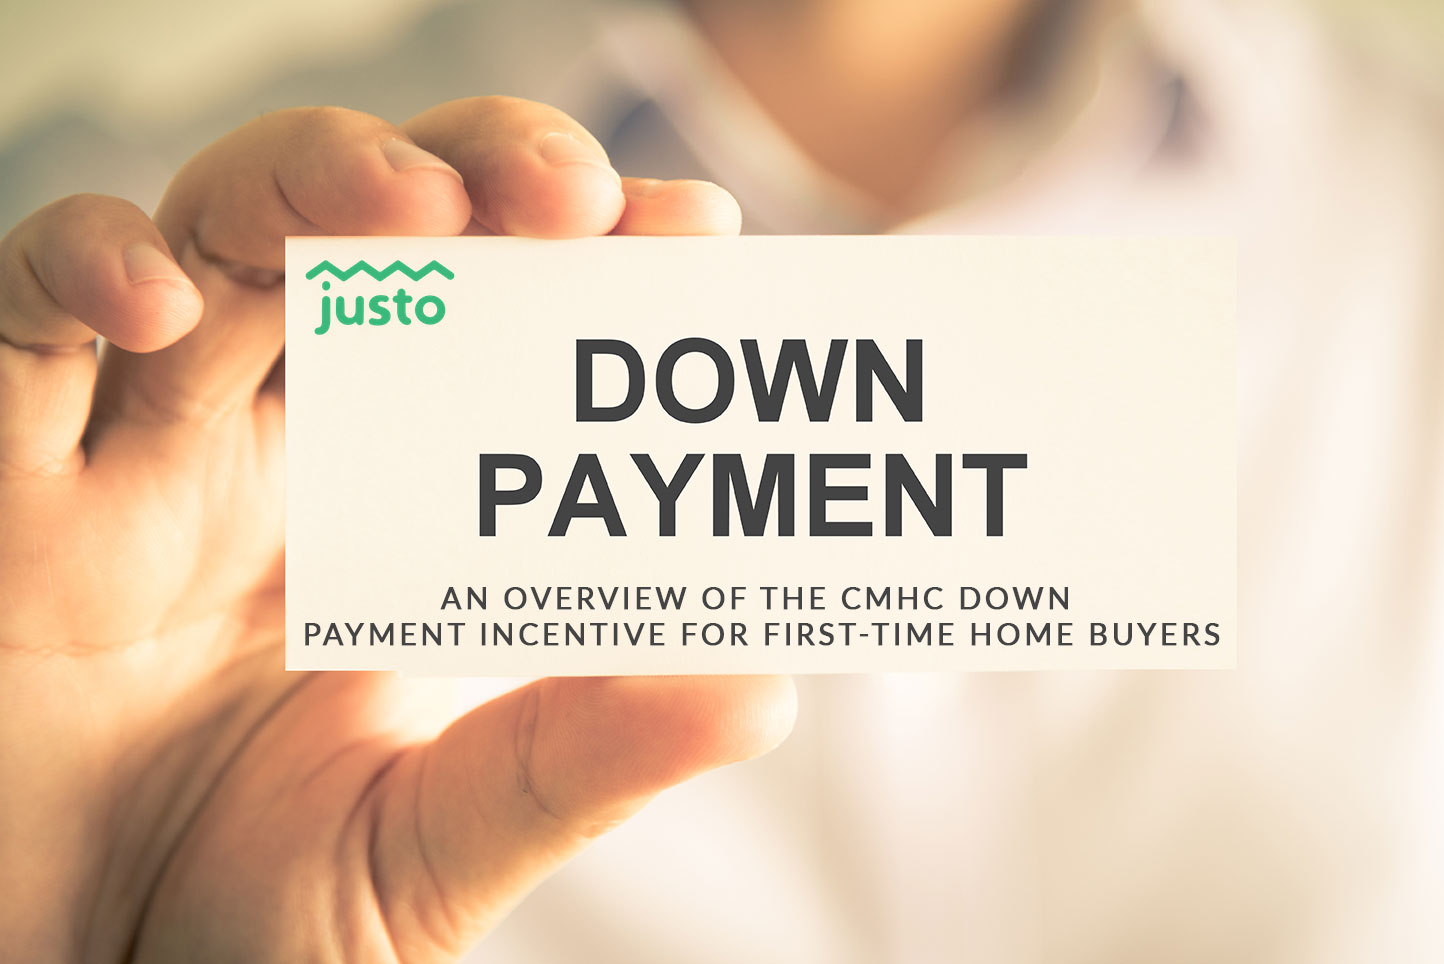 An Overview of the CMHC Down Payment Incentive for First-Time Home Buyers